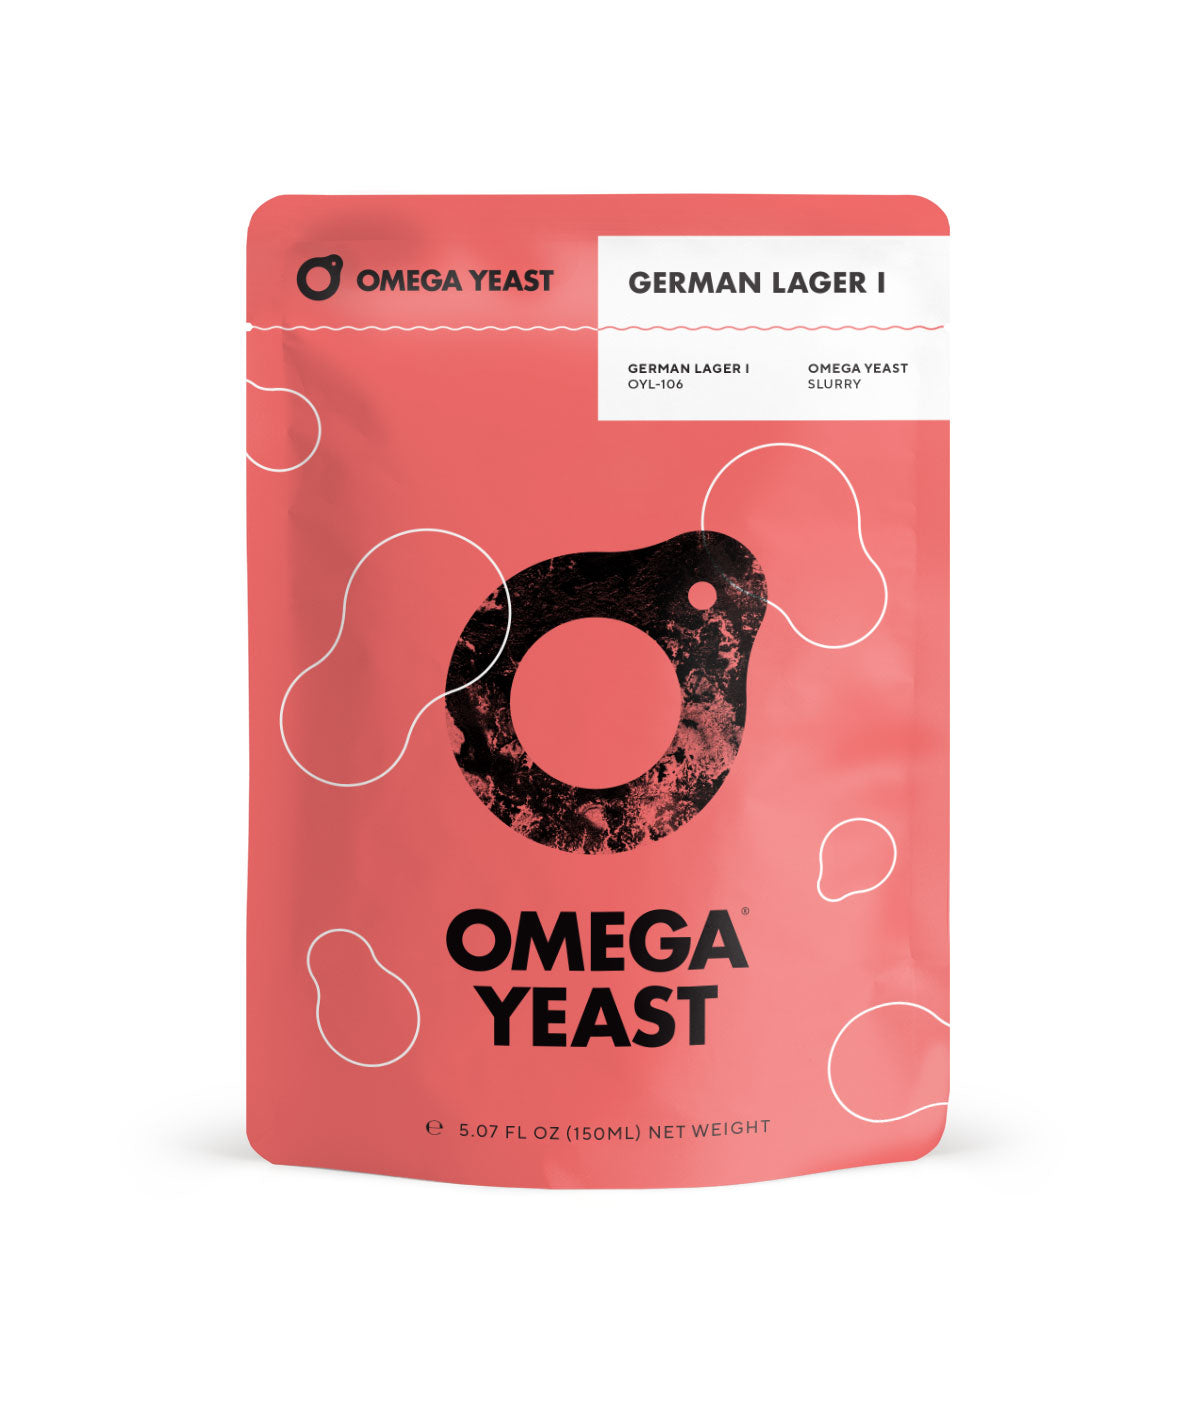 German Lager I Yeast by Omega Yeast